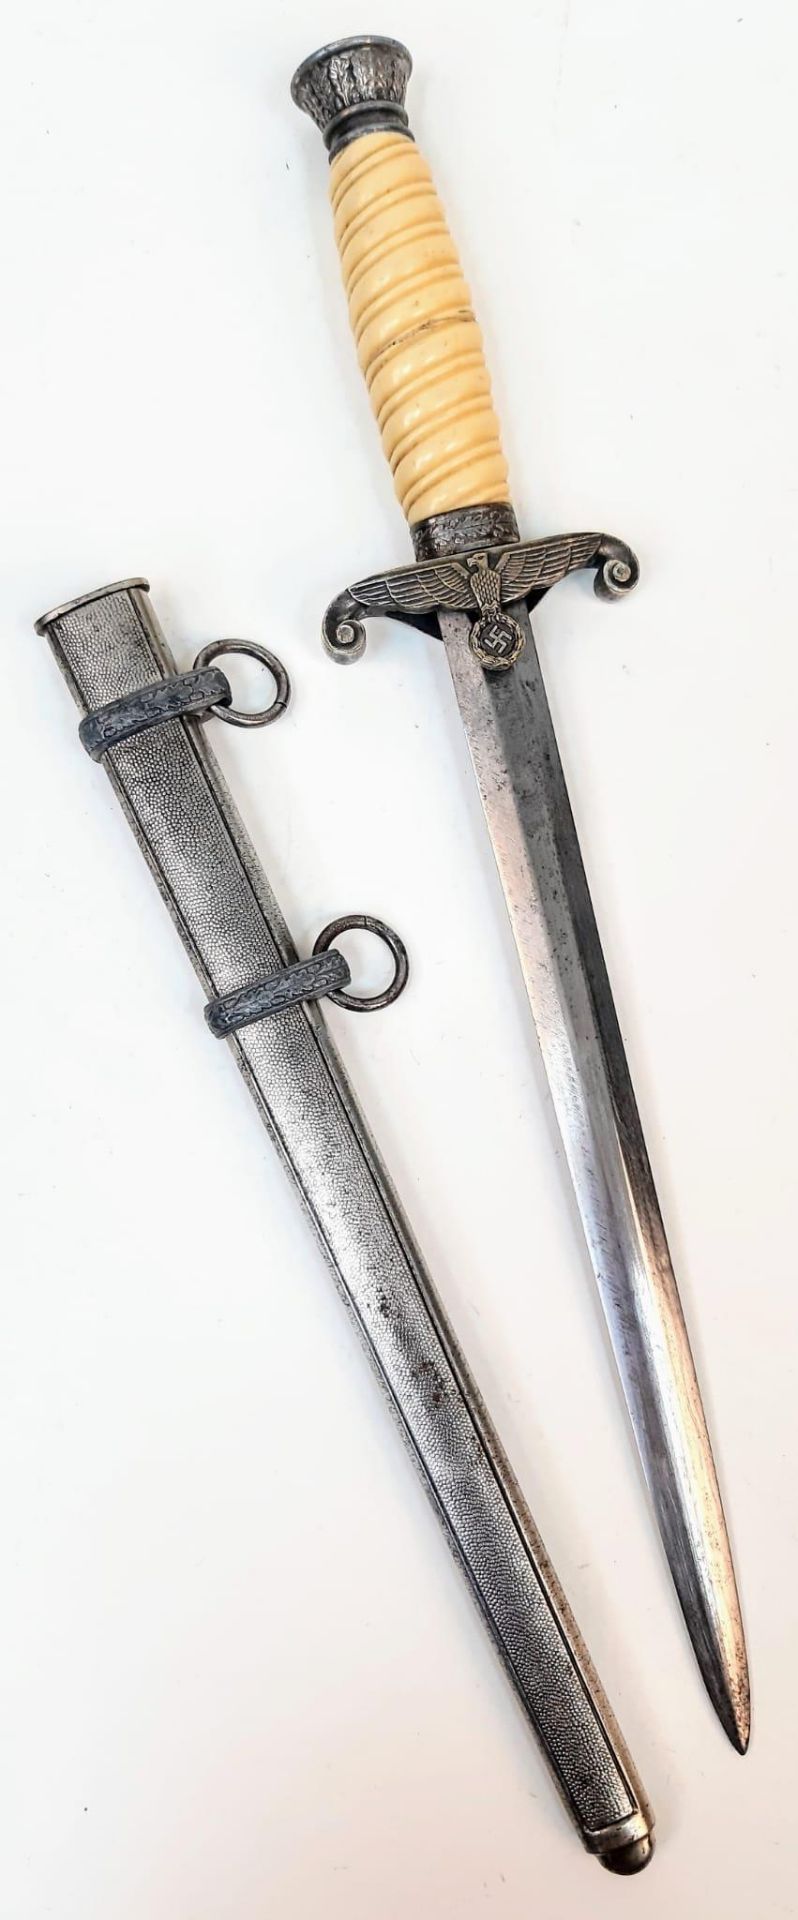 3rd Reich Heer (Army) Officers Dagger. Makers marked but partially removed from sharpening.